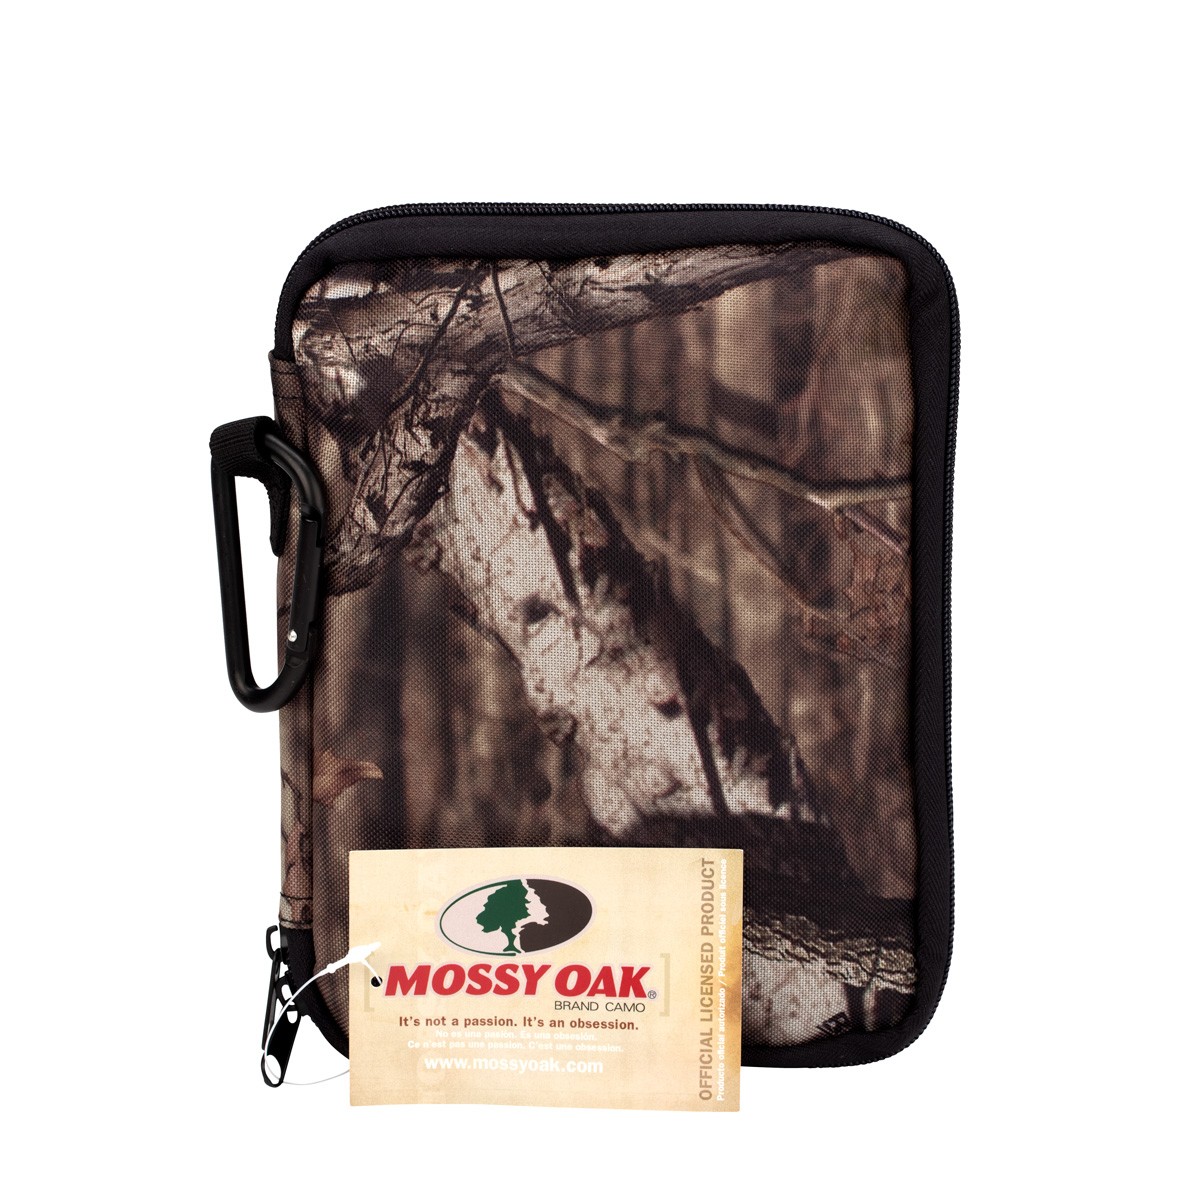 Mossy Oak® Commander First Aid Kit, Soft Pouch